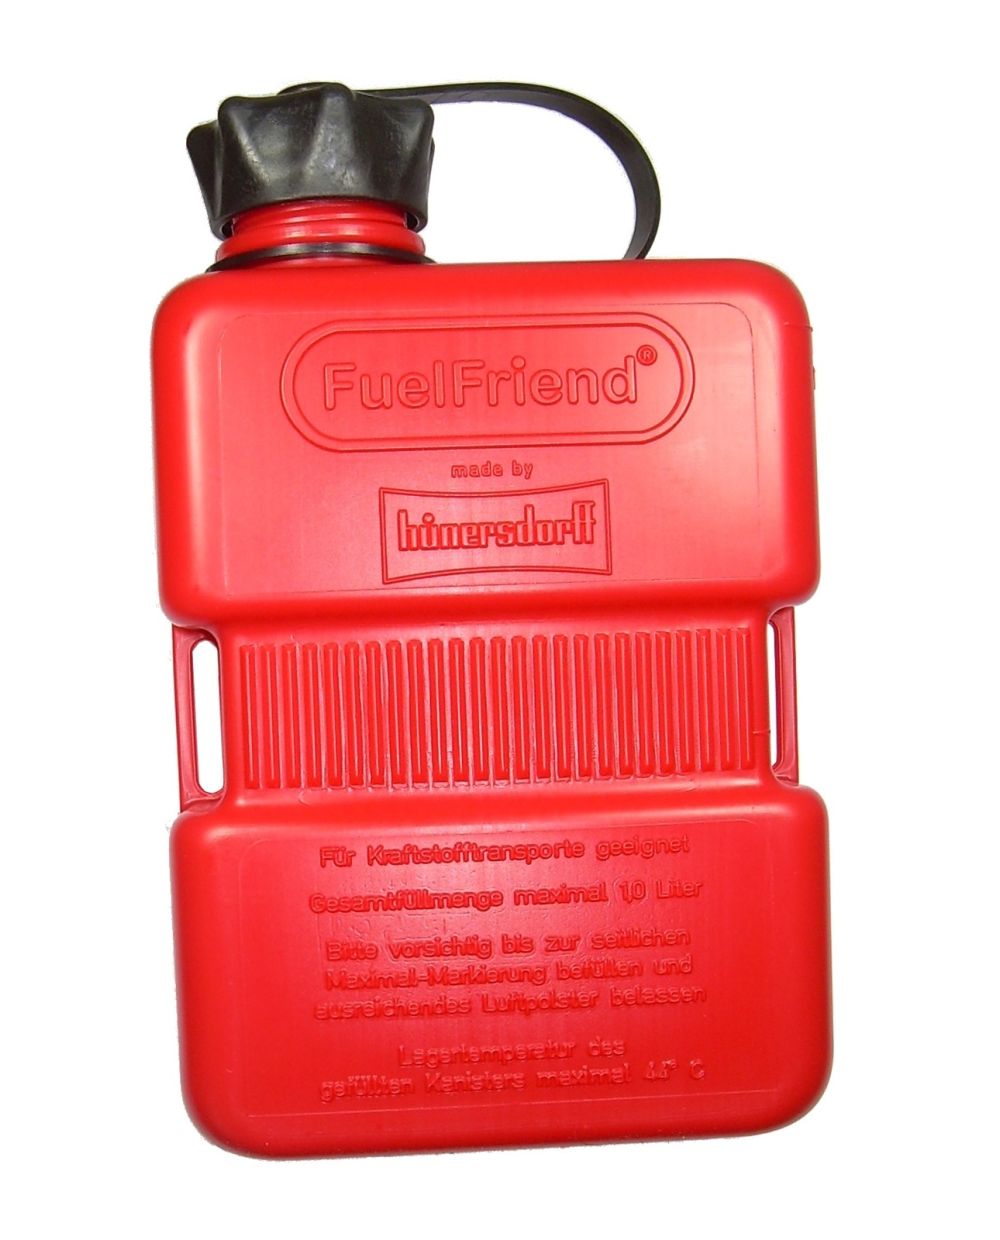 1L Jerry Can Hünersdorff 'Fuelfriend', red, suitable for petrol/oil,  fastening straps for tension belts, dim. incl. cap: 210x121x67mm